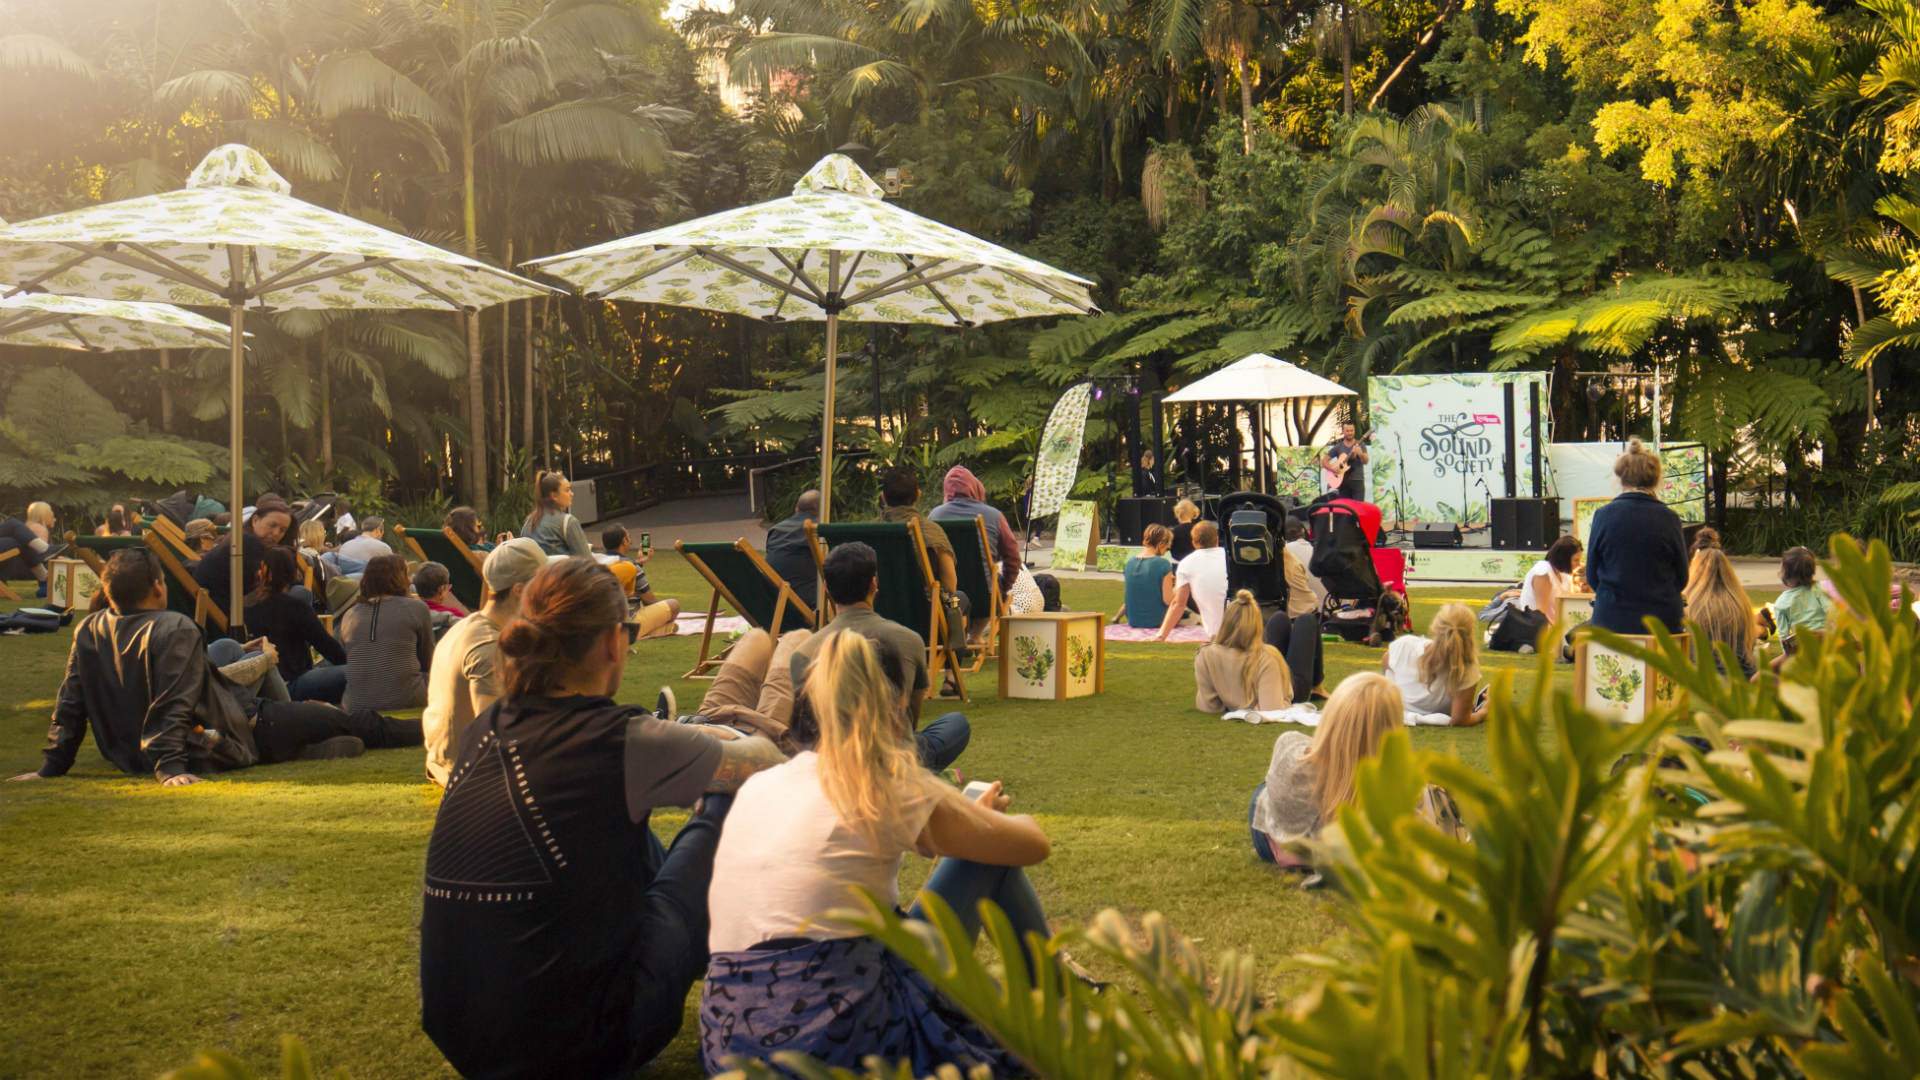 The Sound Society at South Bank Parklands